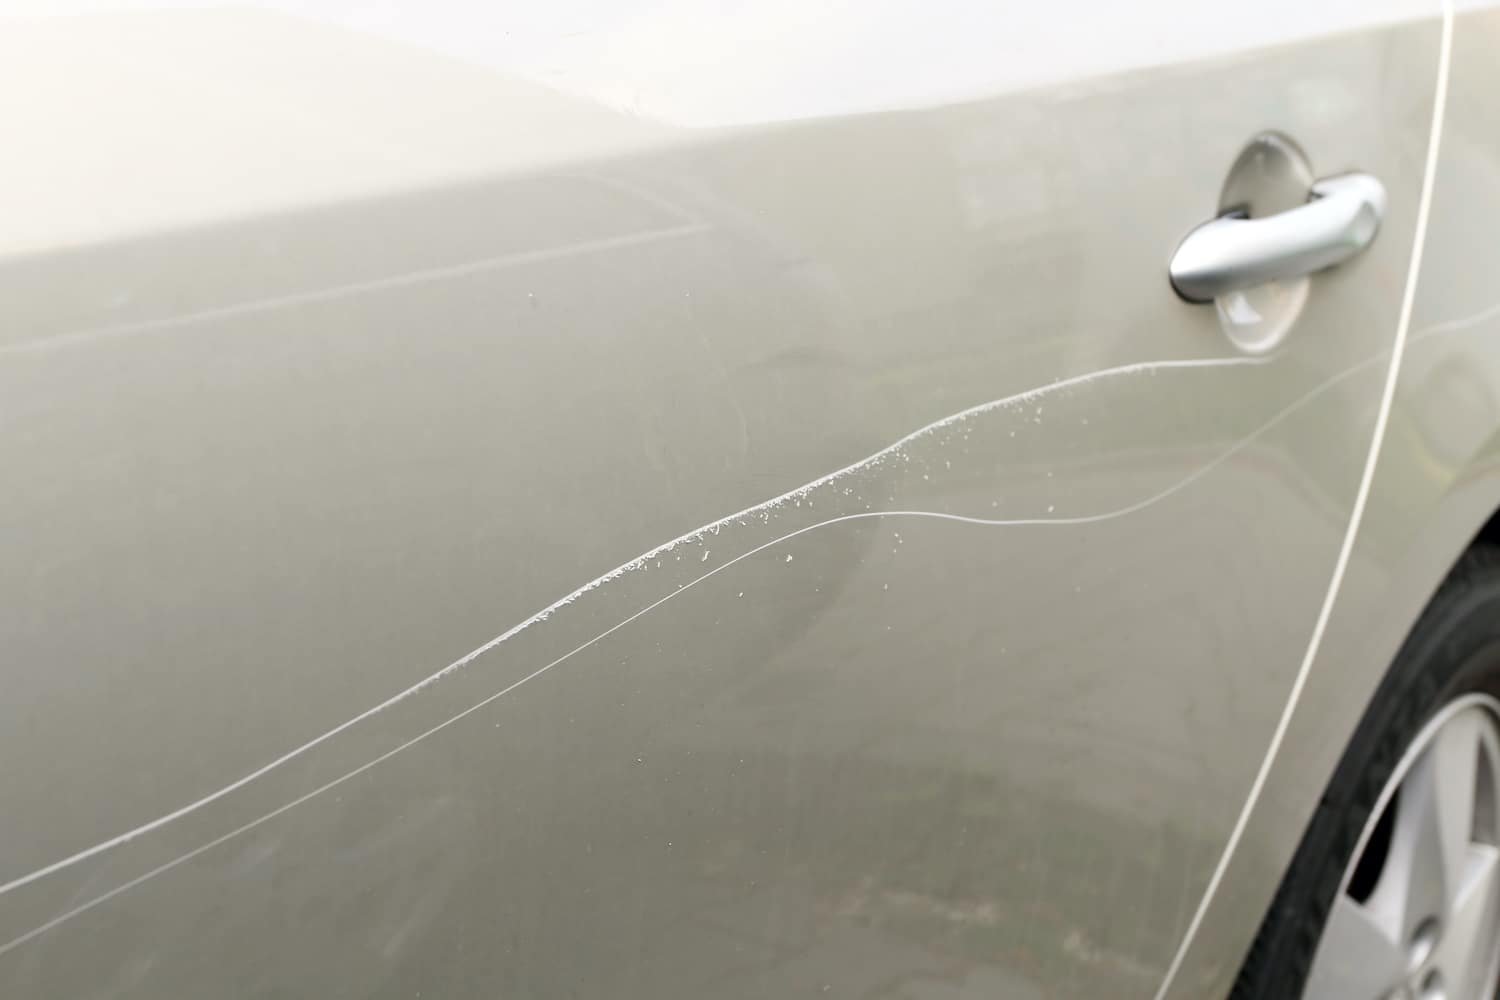 Scratches on the paintwork of your car? Get rid of them easily